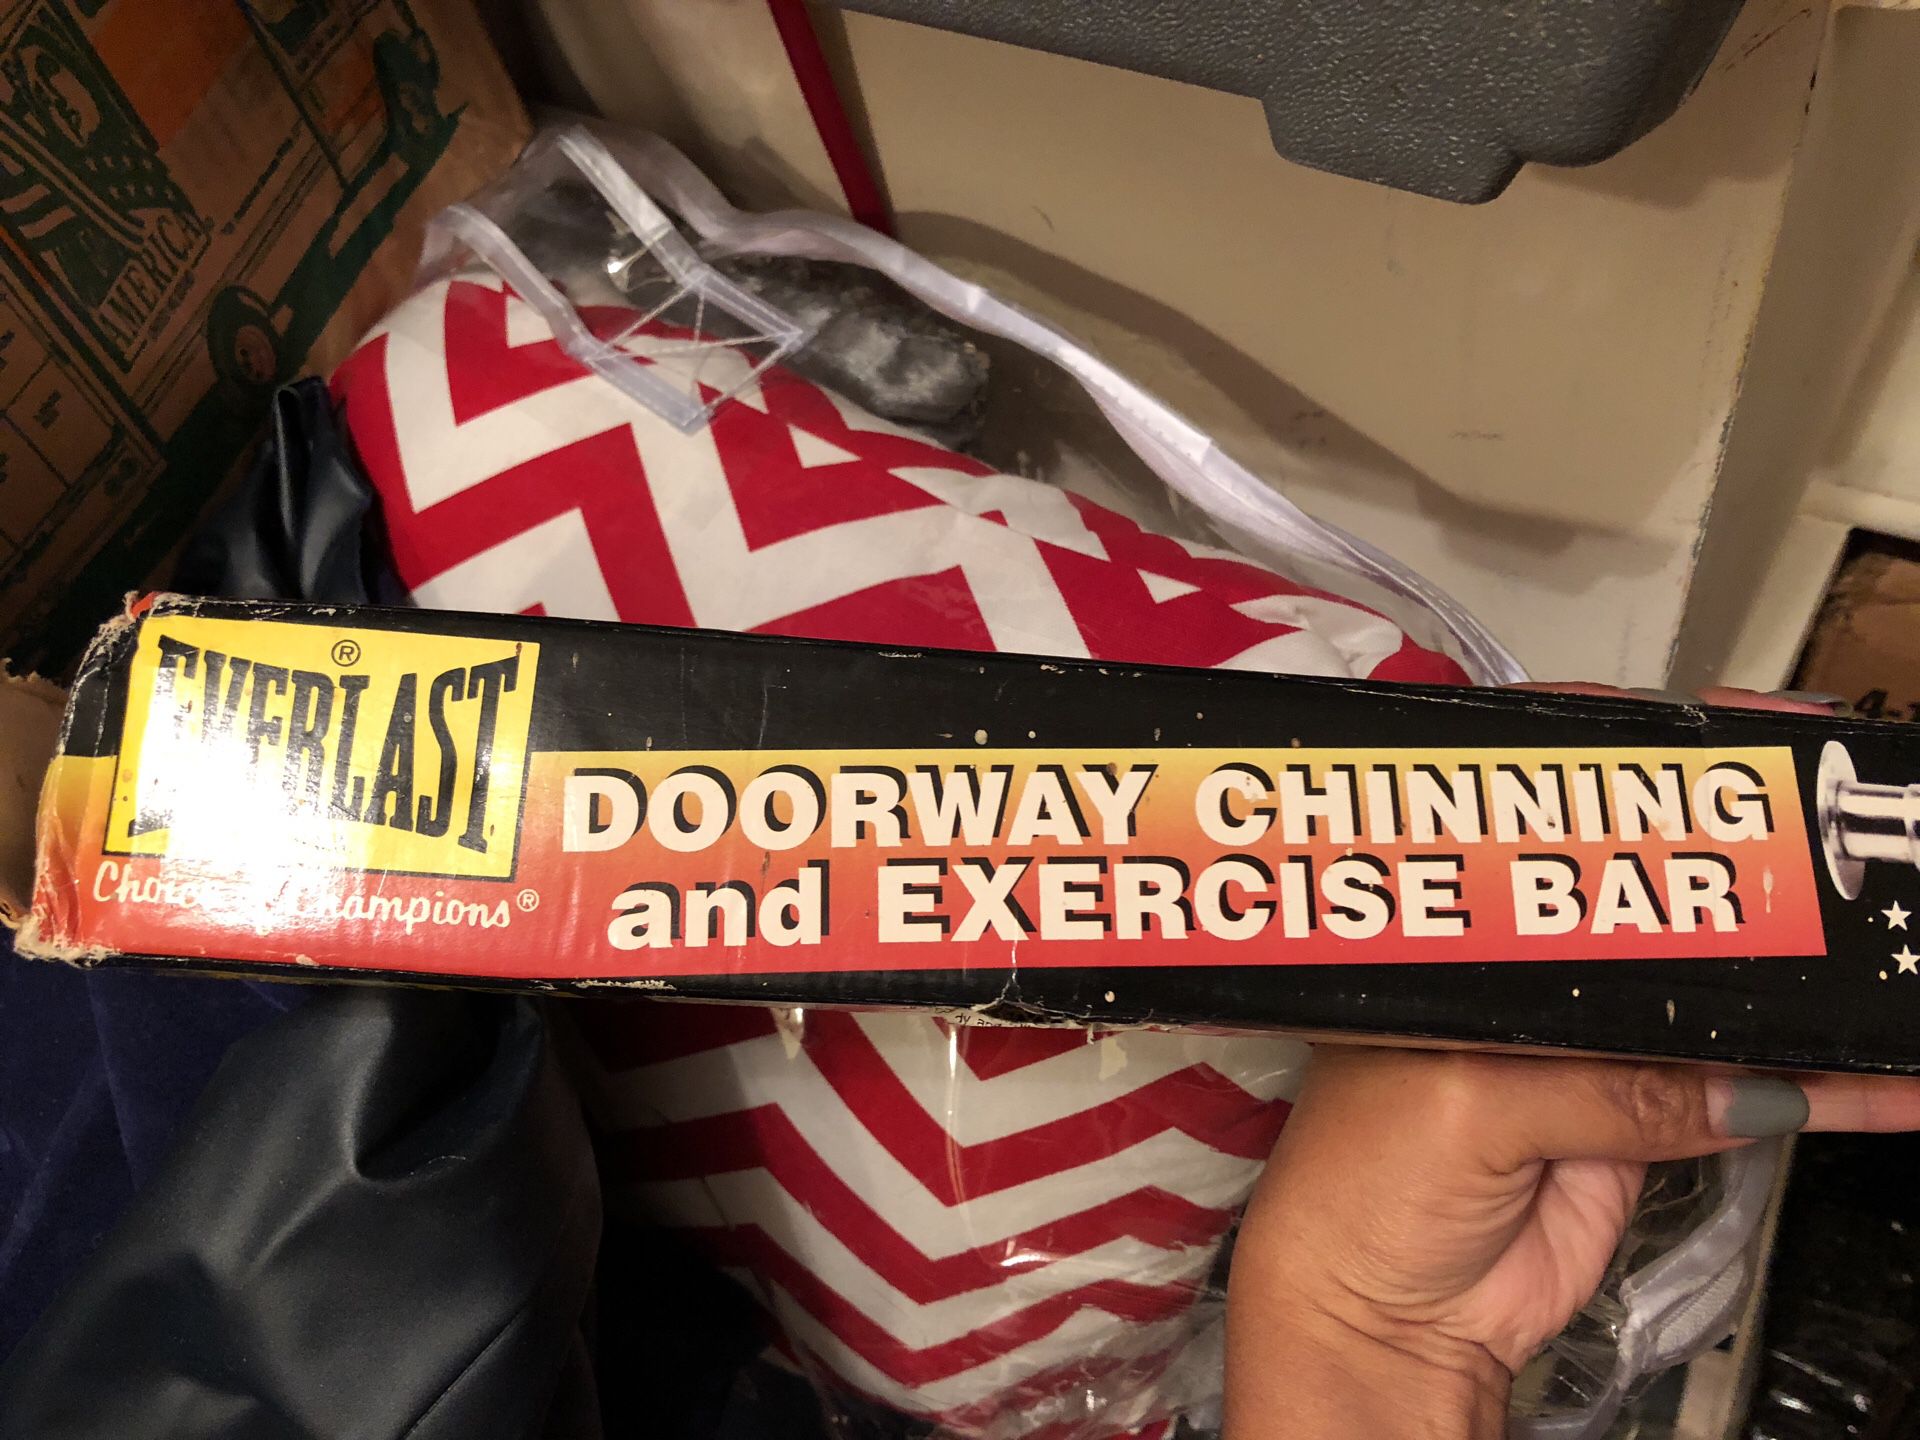 Doorway chinning and exercise bar